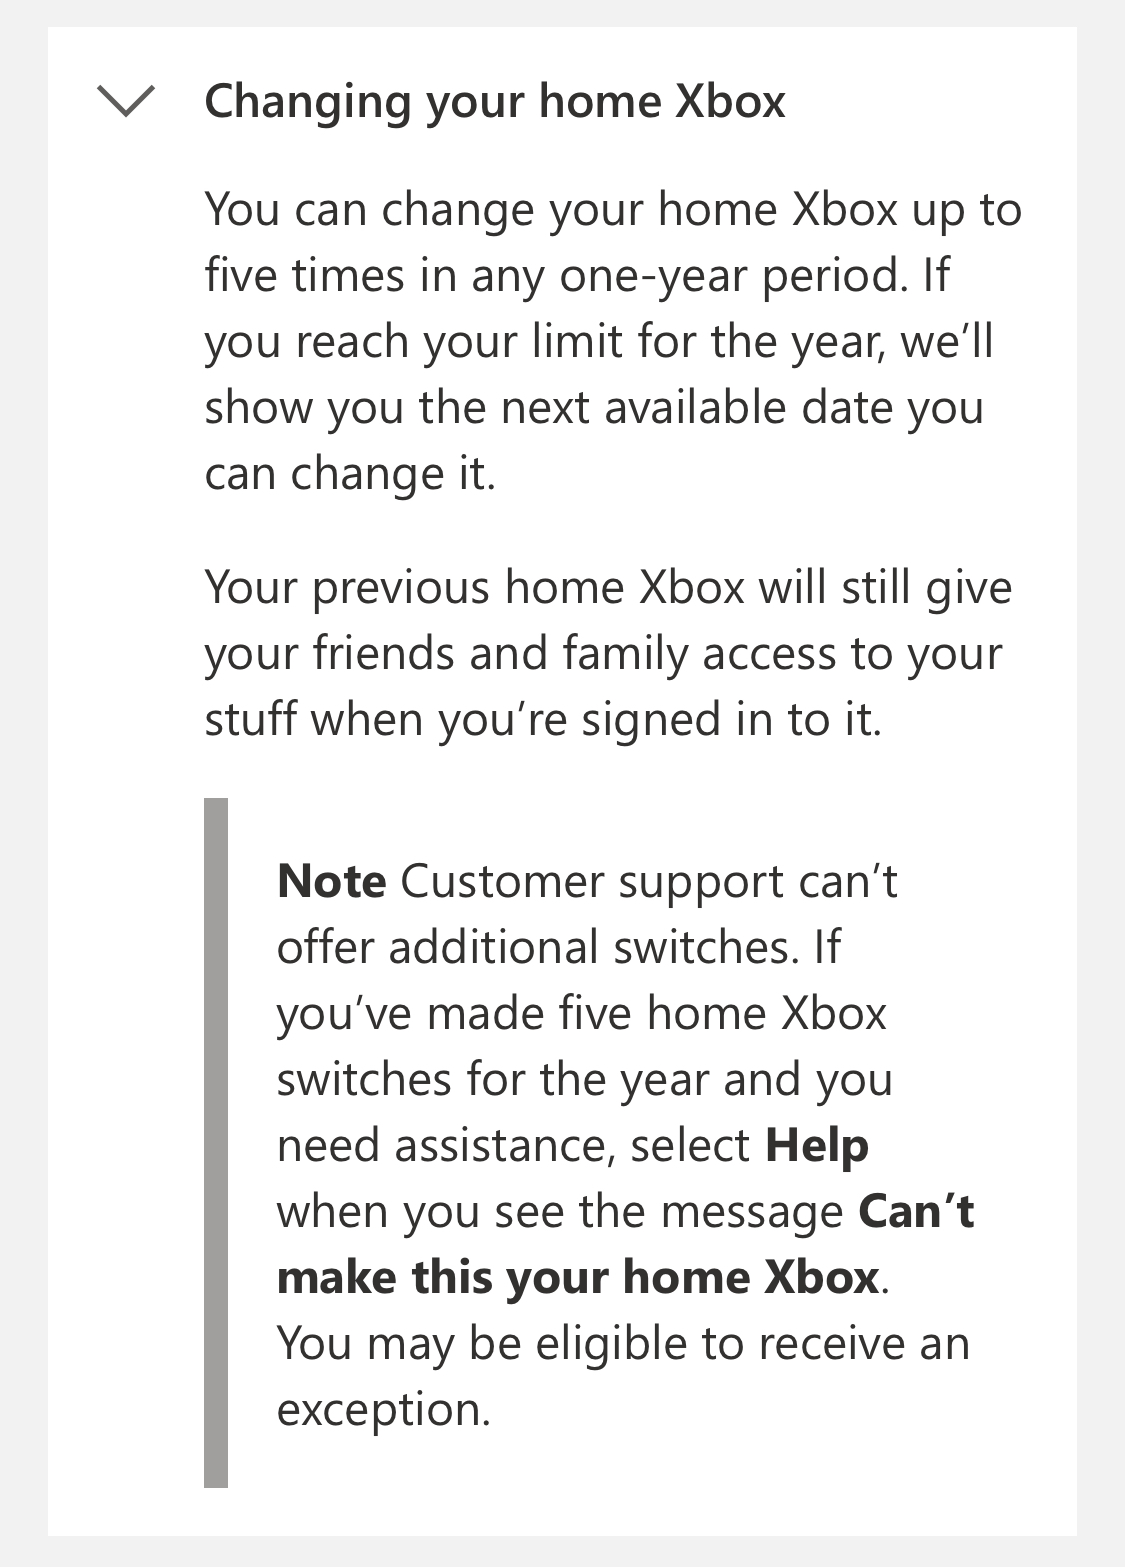 how to get one more home xbox switch